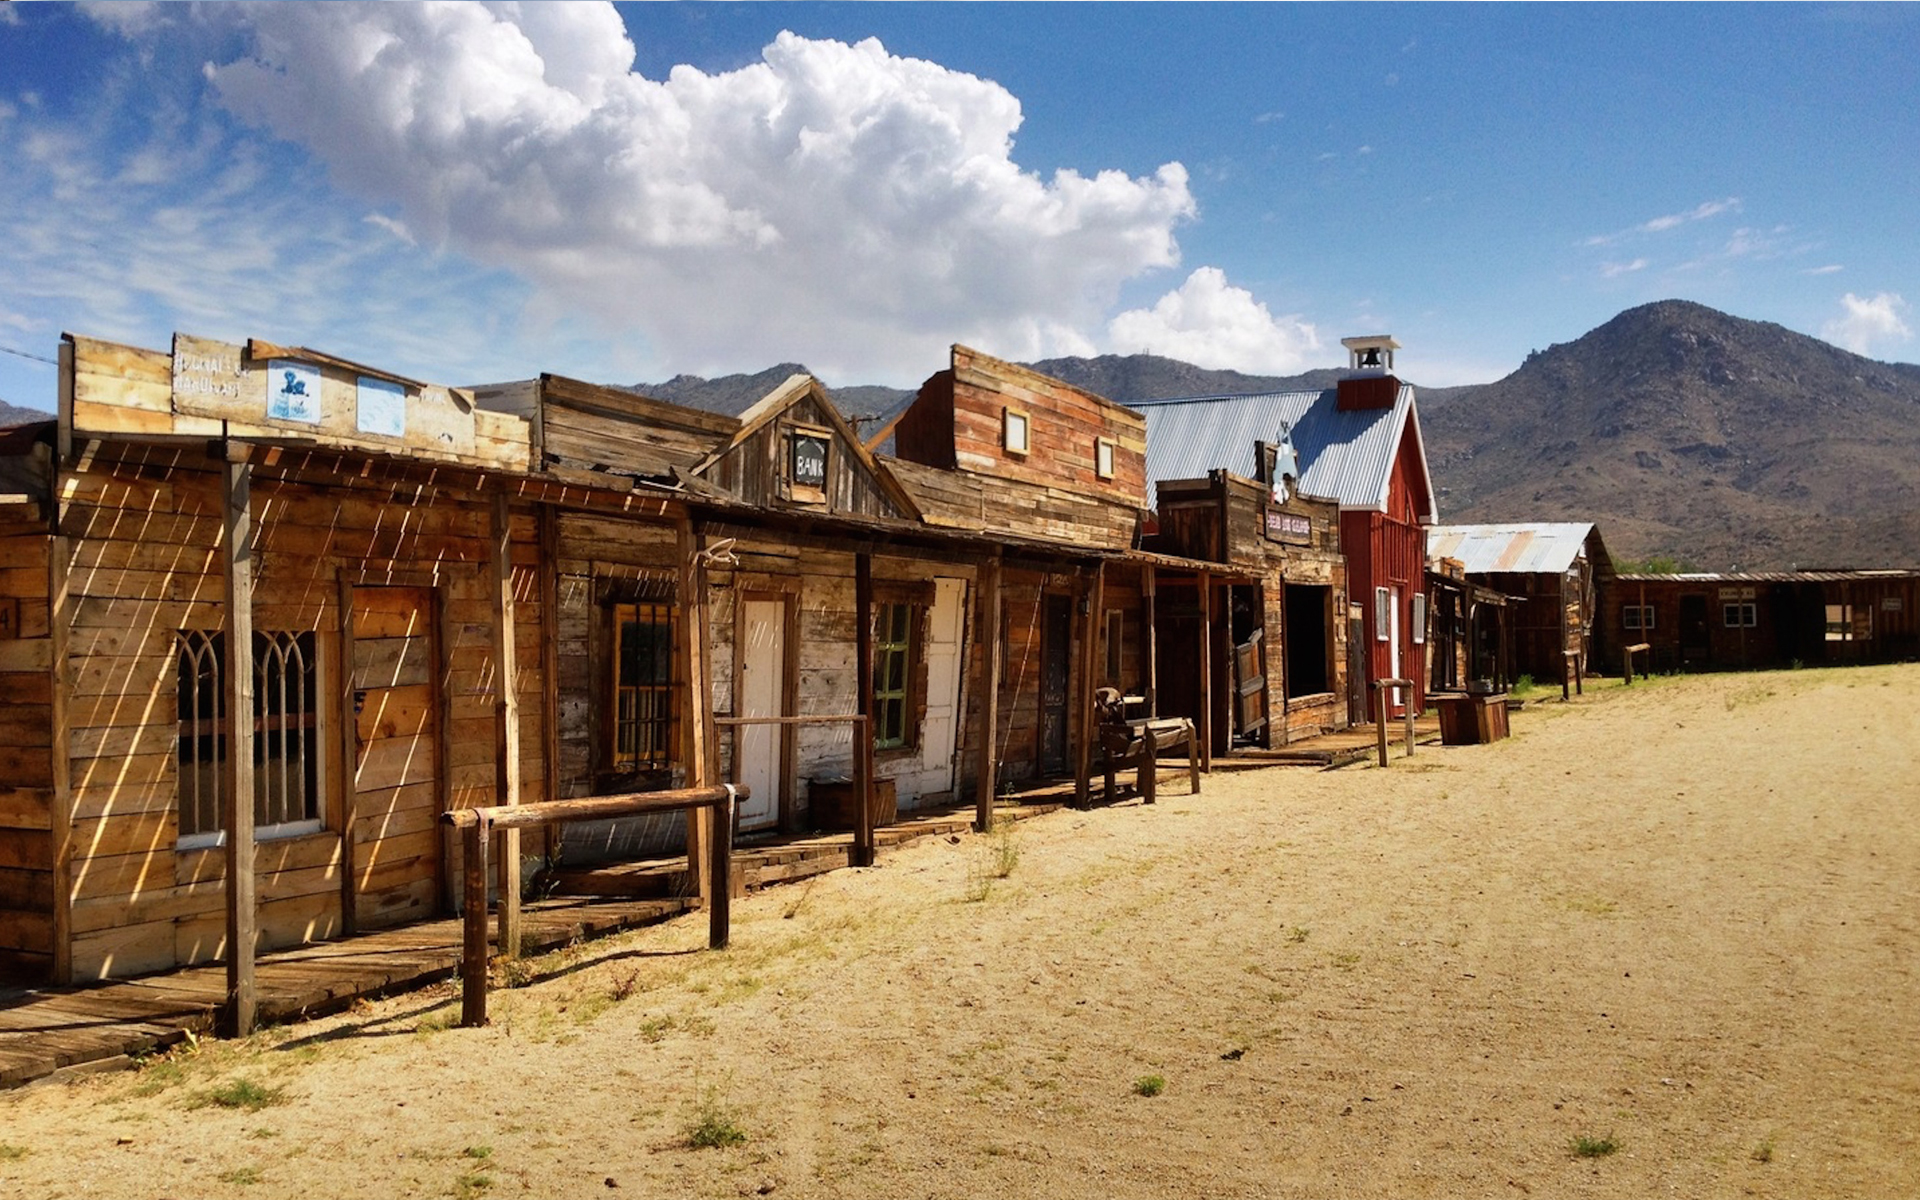 Wild West Ghost Town and Hoover tour from Las Vegas